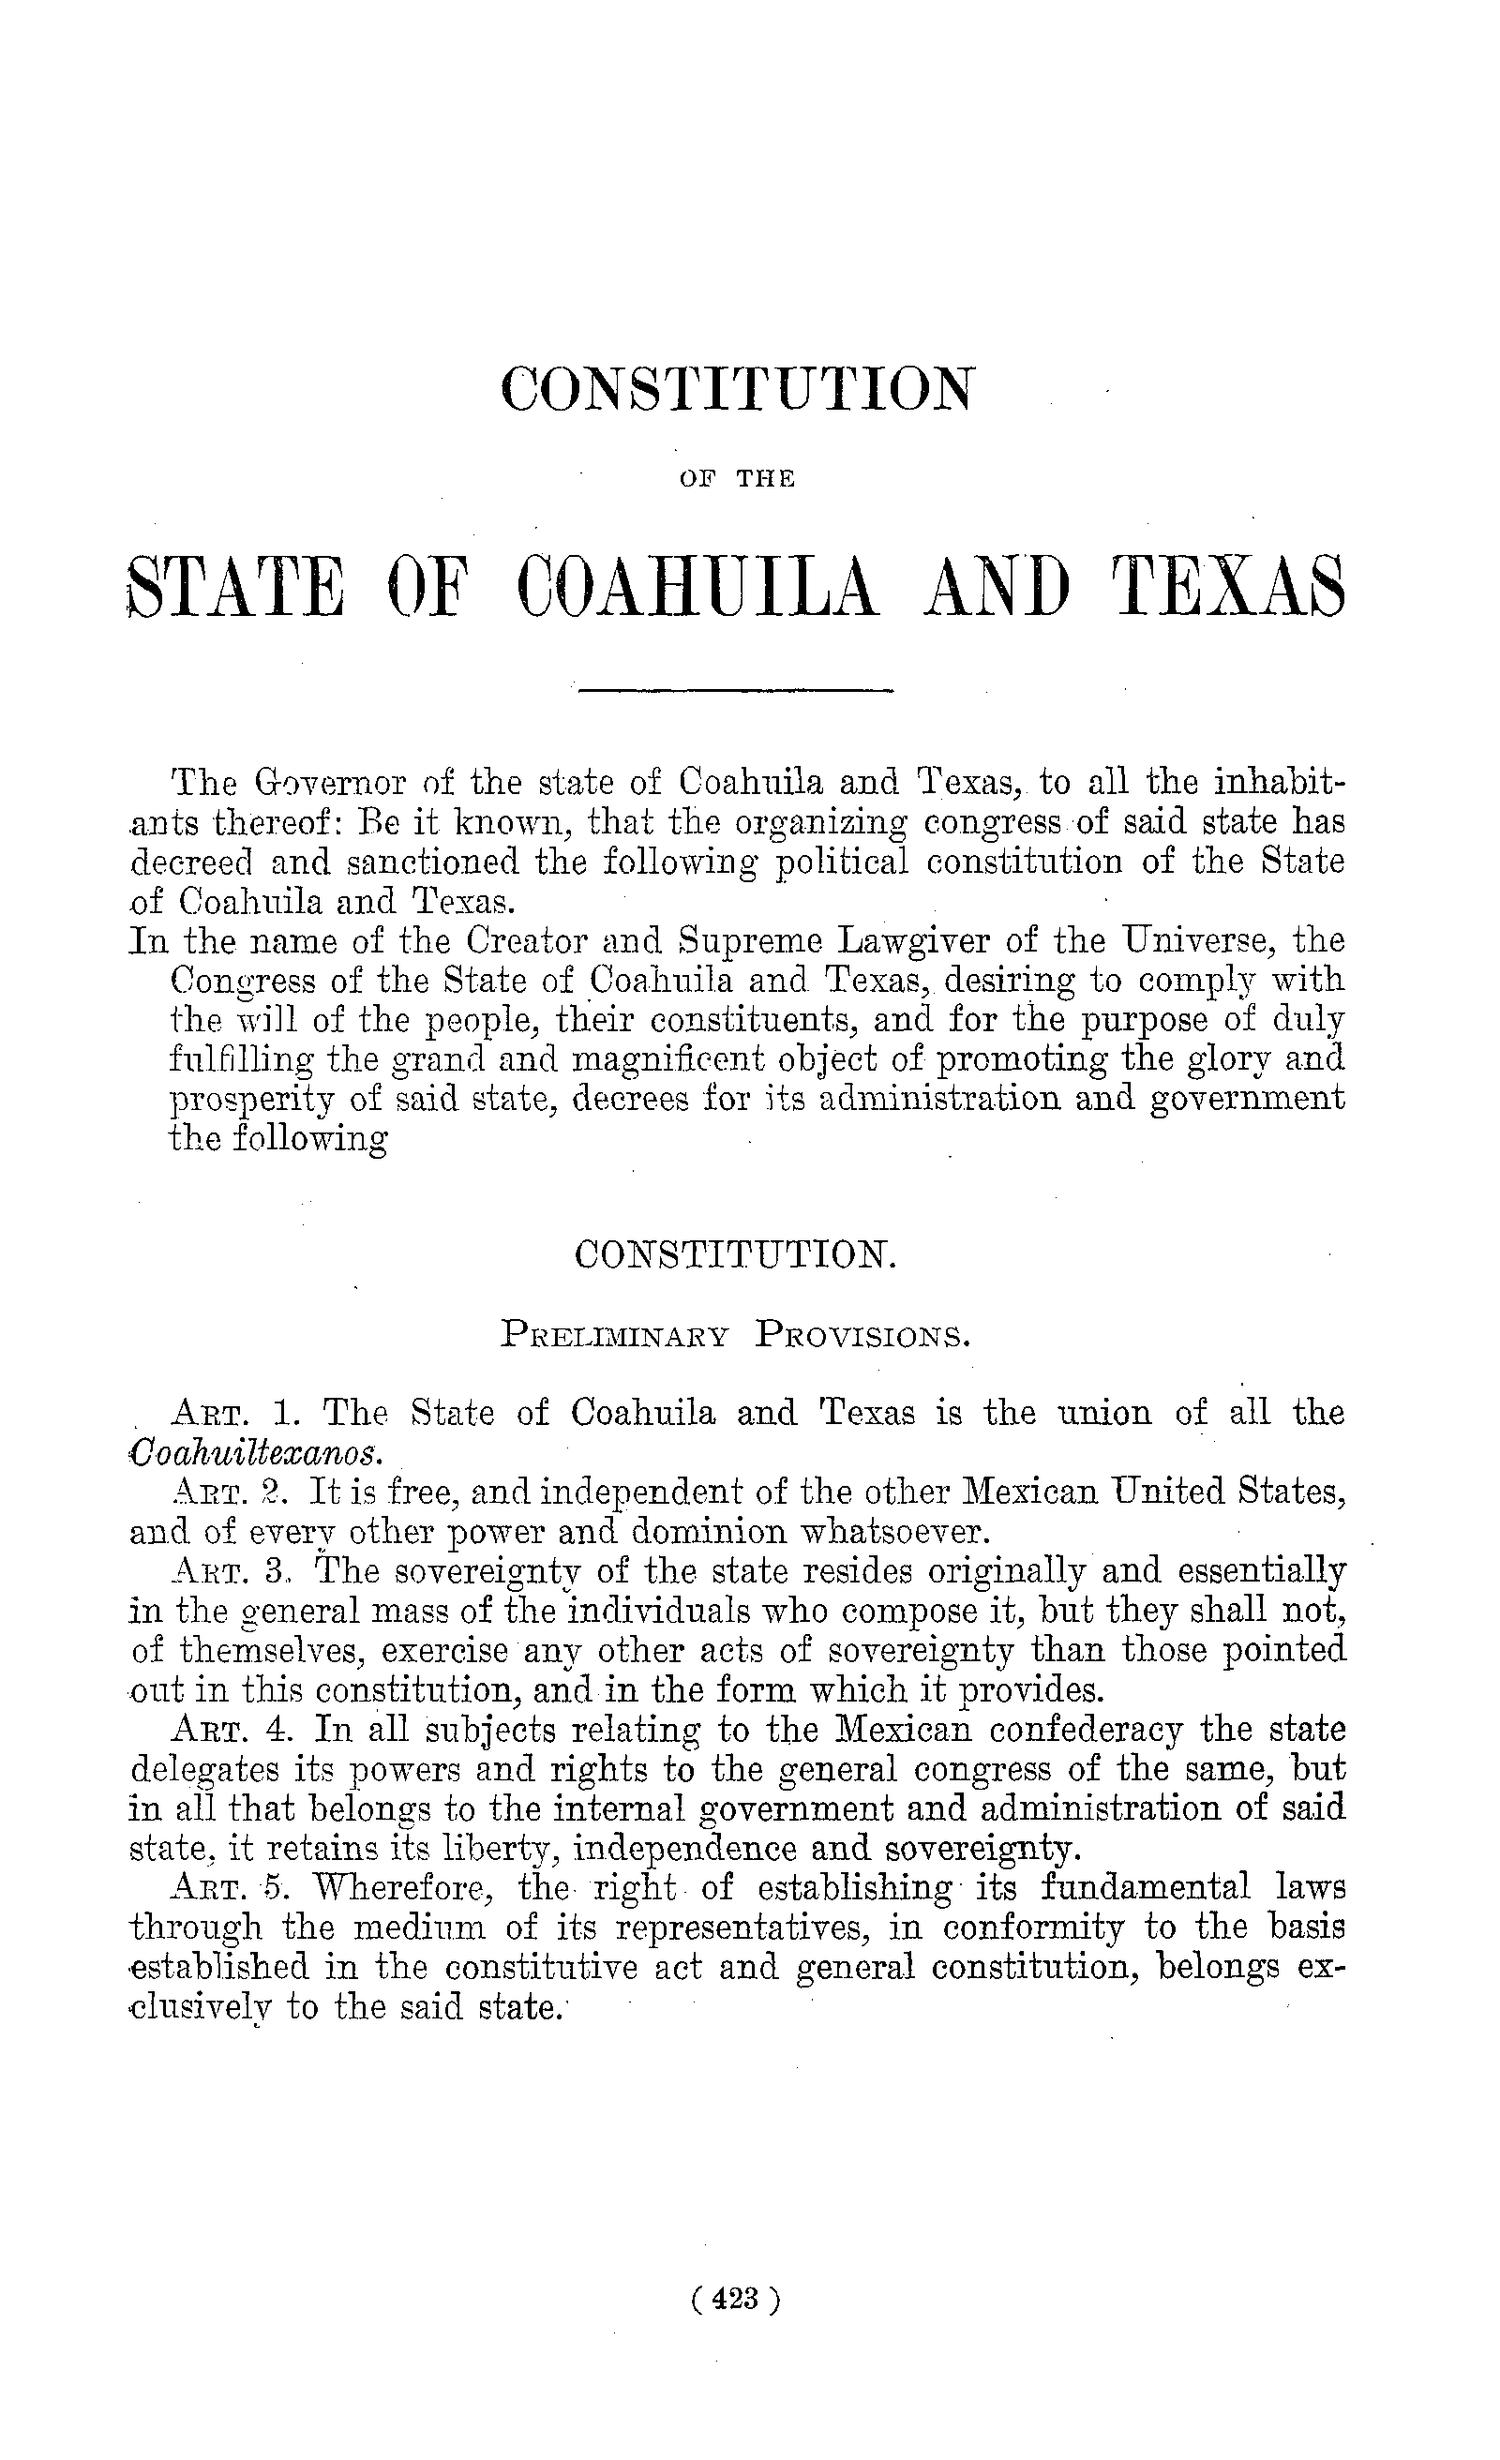 The Laws of Texas, 1822-1897 Volume 1
                                                
                                                    423
                                                